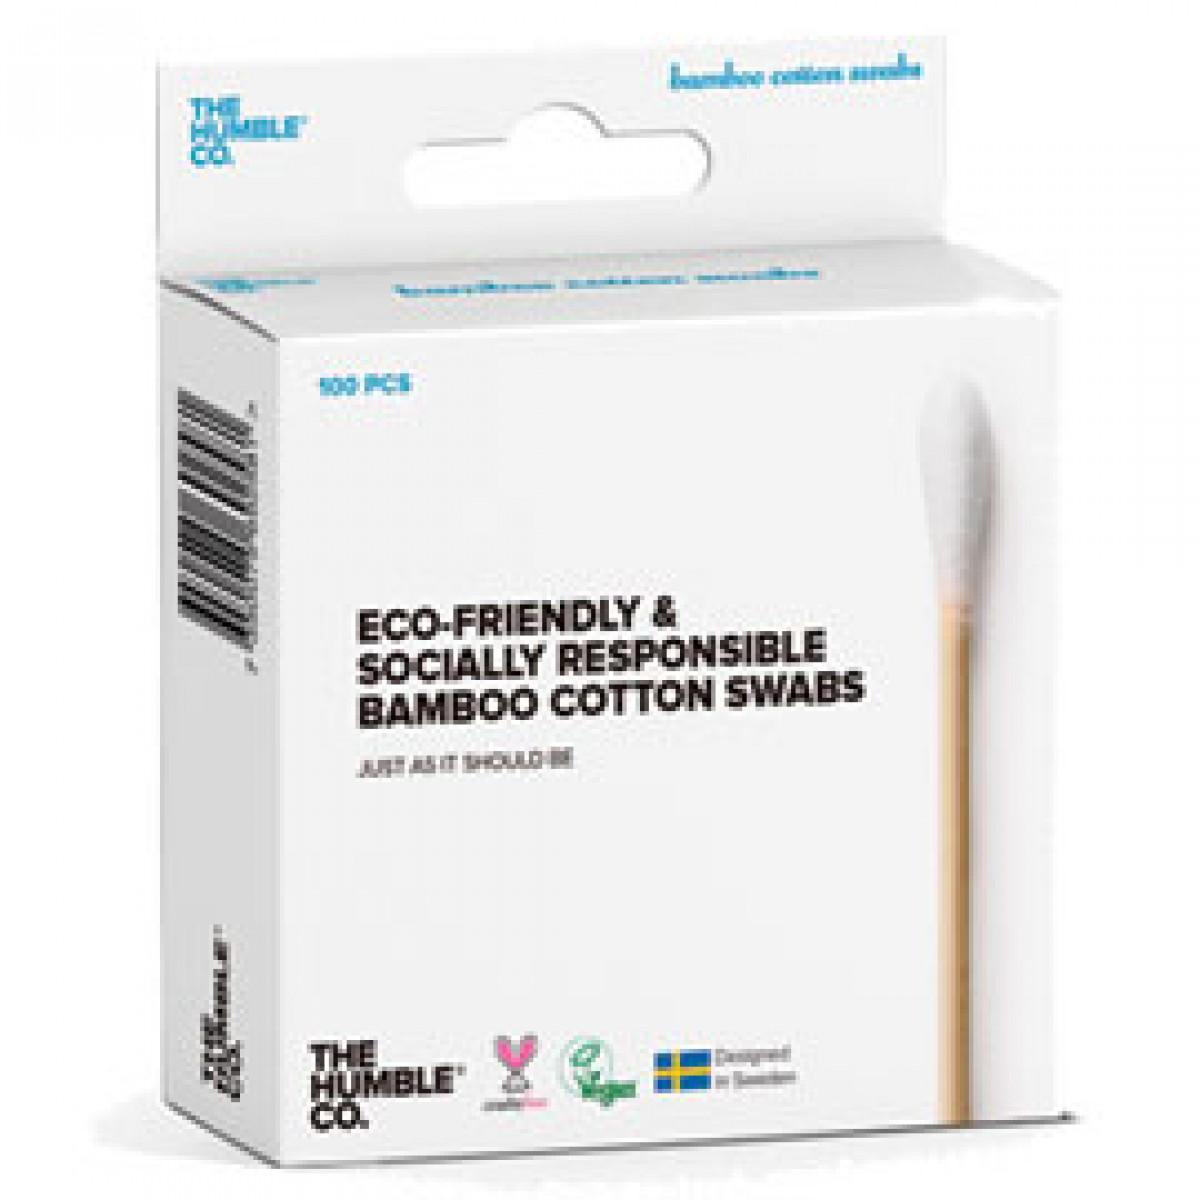 Product picture for Bamboo Cotton Swabs/Buds